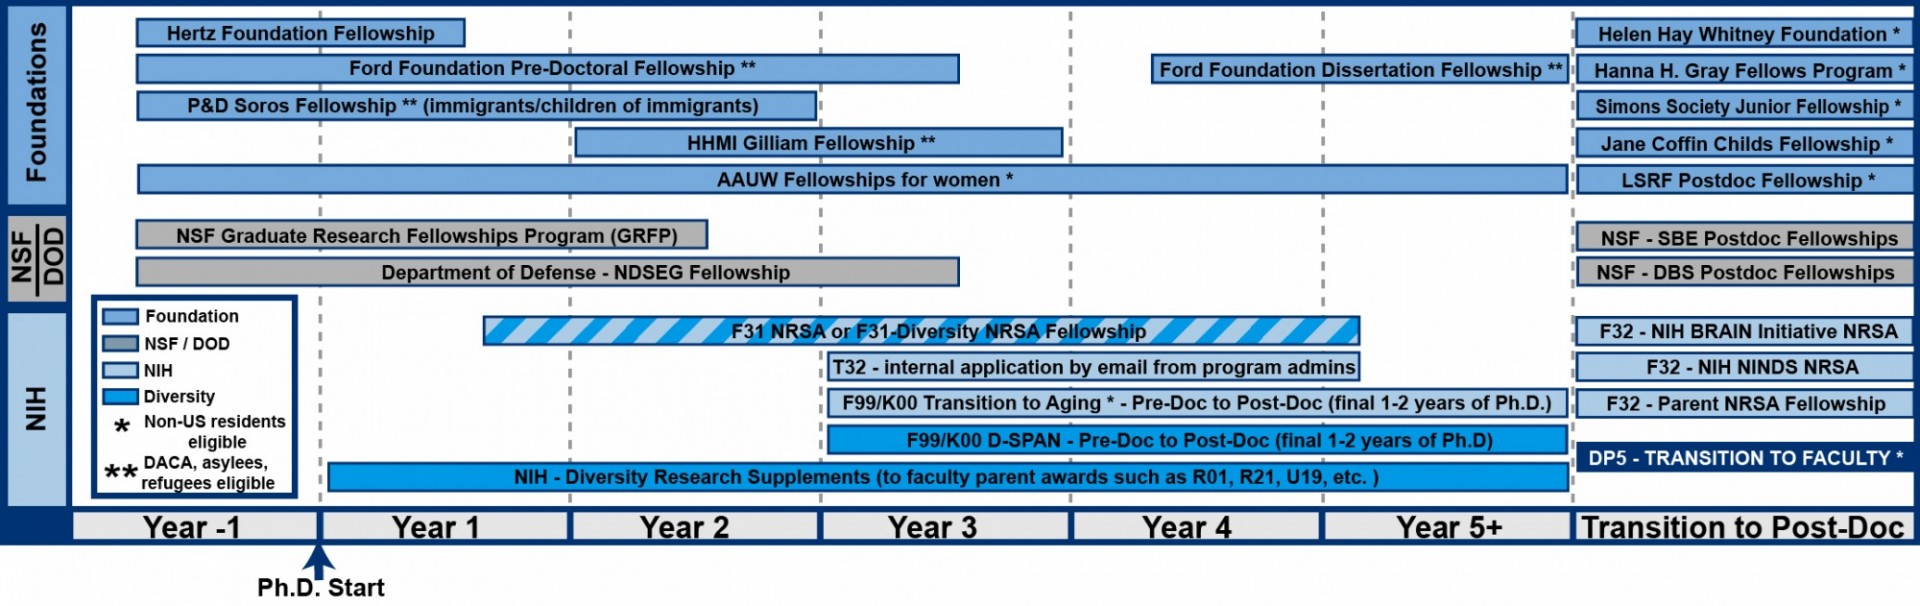 PhD funding map showing funding opportunities offered by foundations, NSF, and NIH from the year before starting the PhD to year 5+ and the transition to postdoc. All detailed information is reproduced in the tables below.